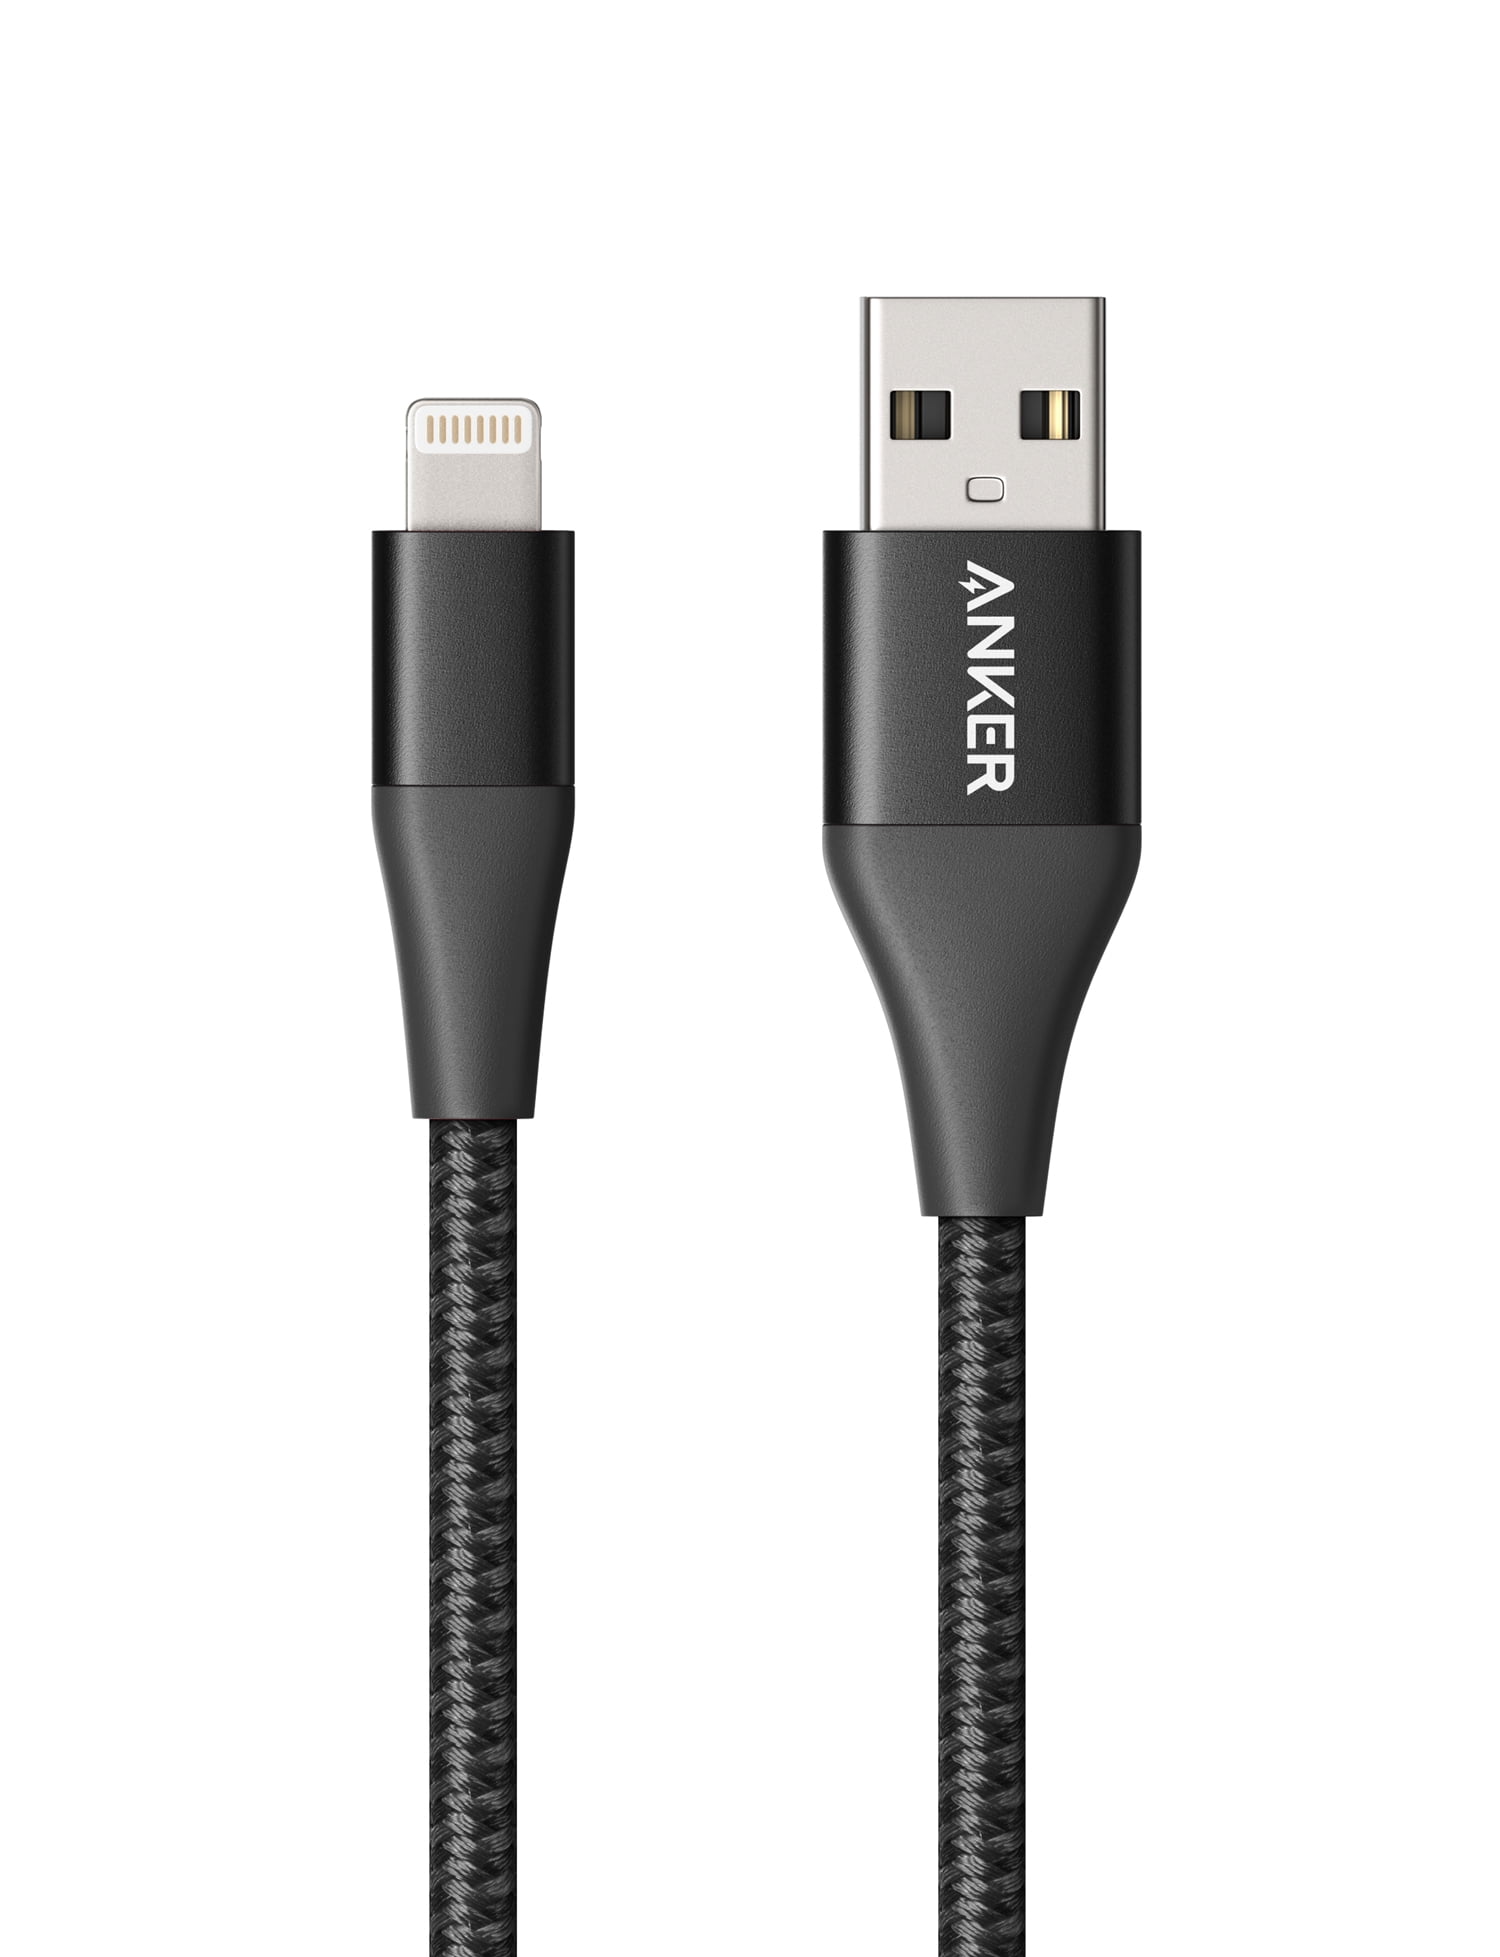 Anker Powerline+ II Braided Nylon Lightning Charging Cable w/Pouch (3ft), MFi  Certified,Black 